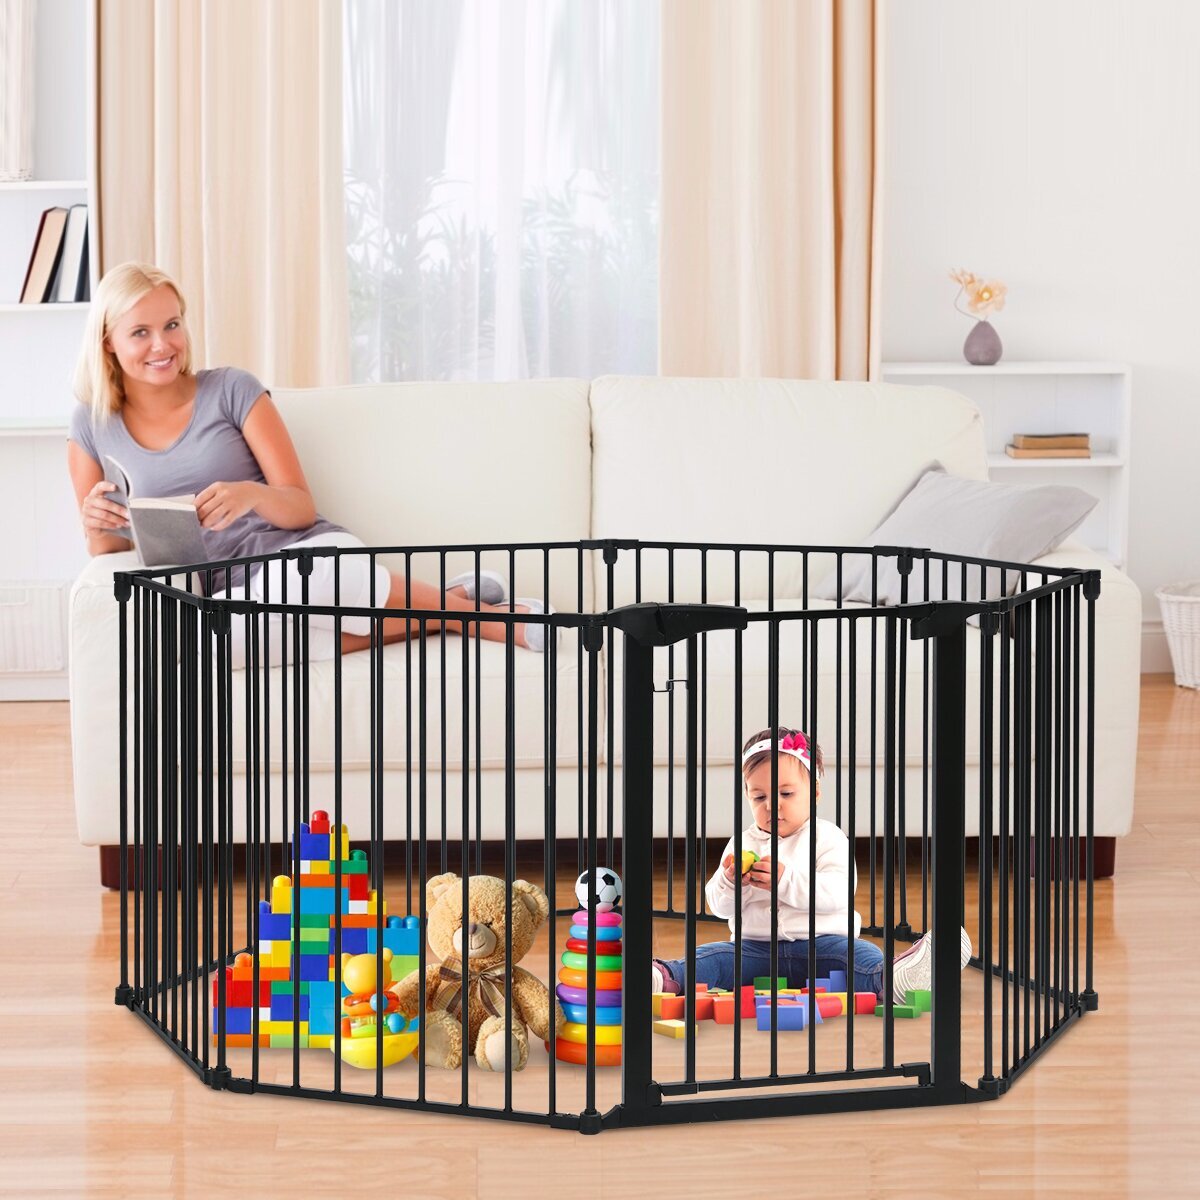 Large portable play yard that’s more minimalist or industrial